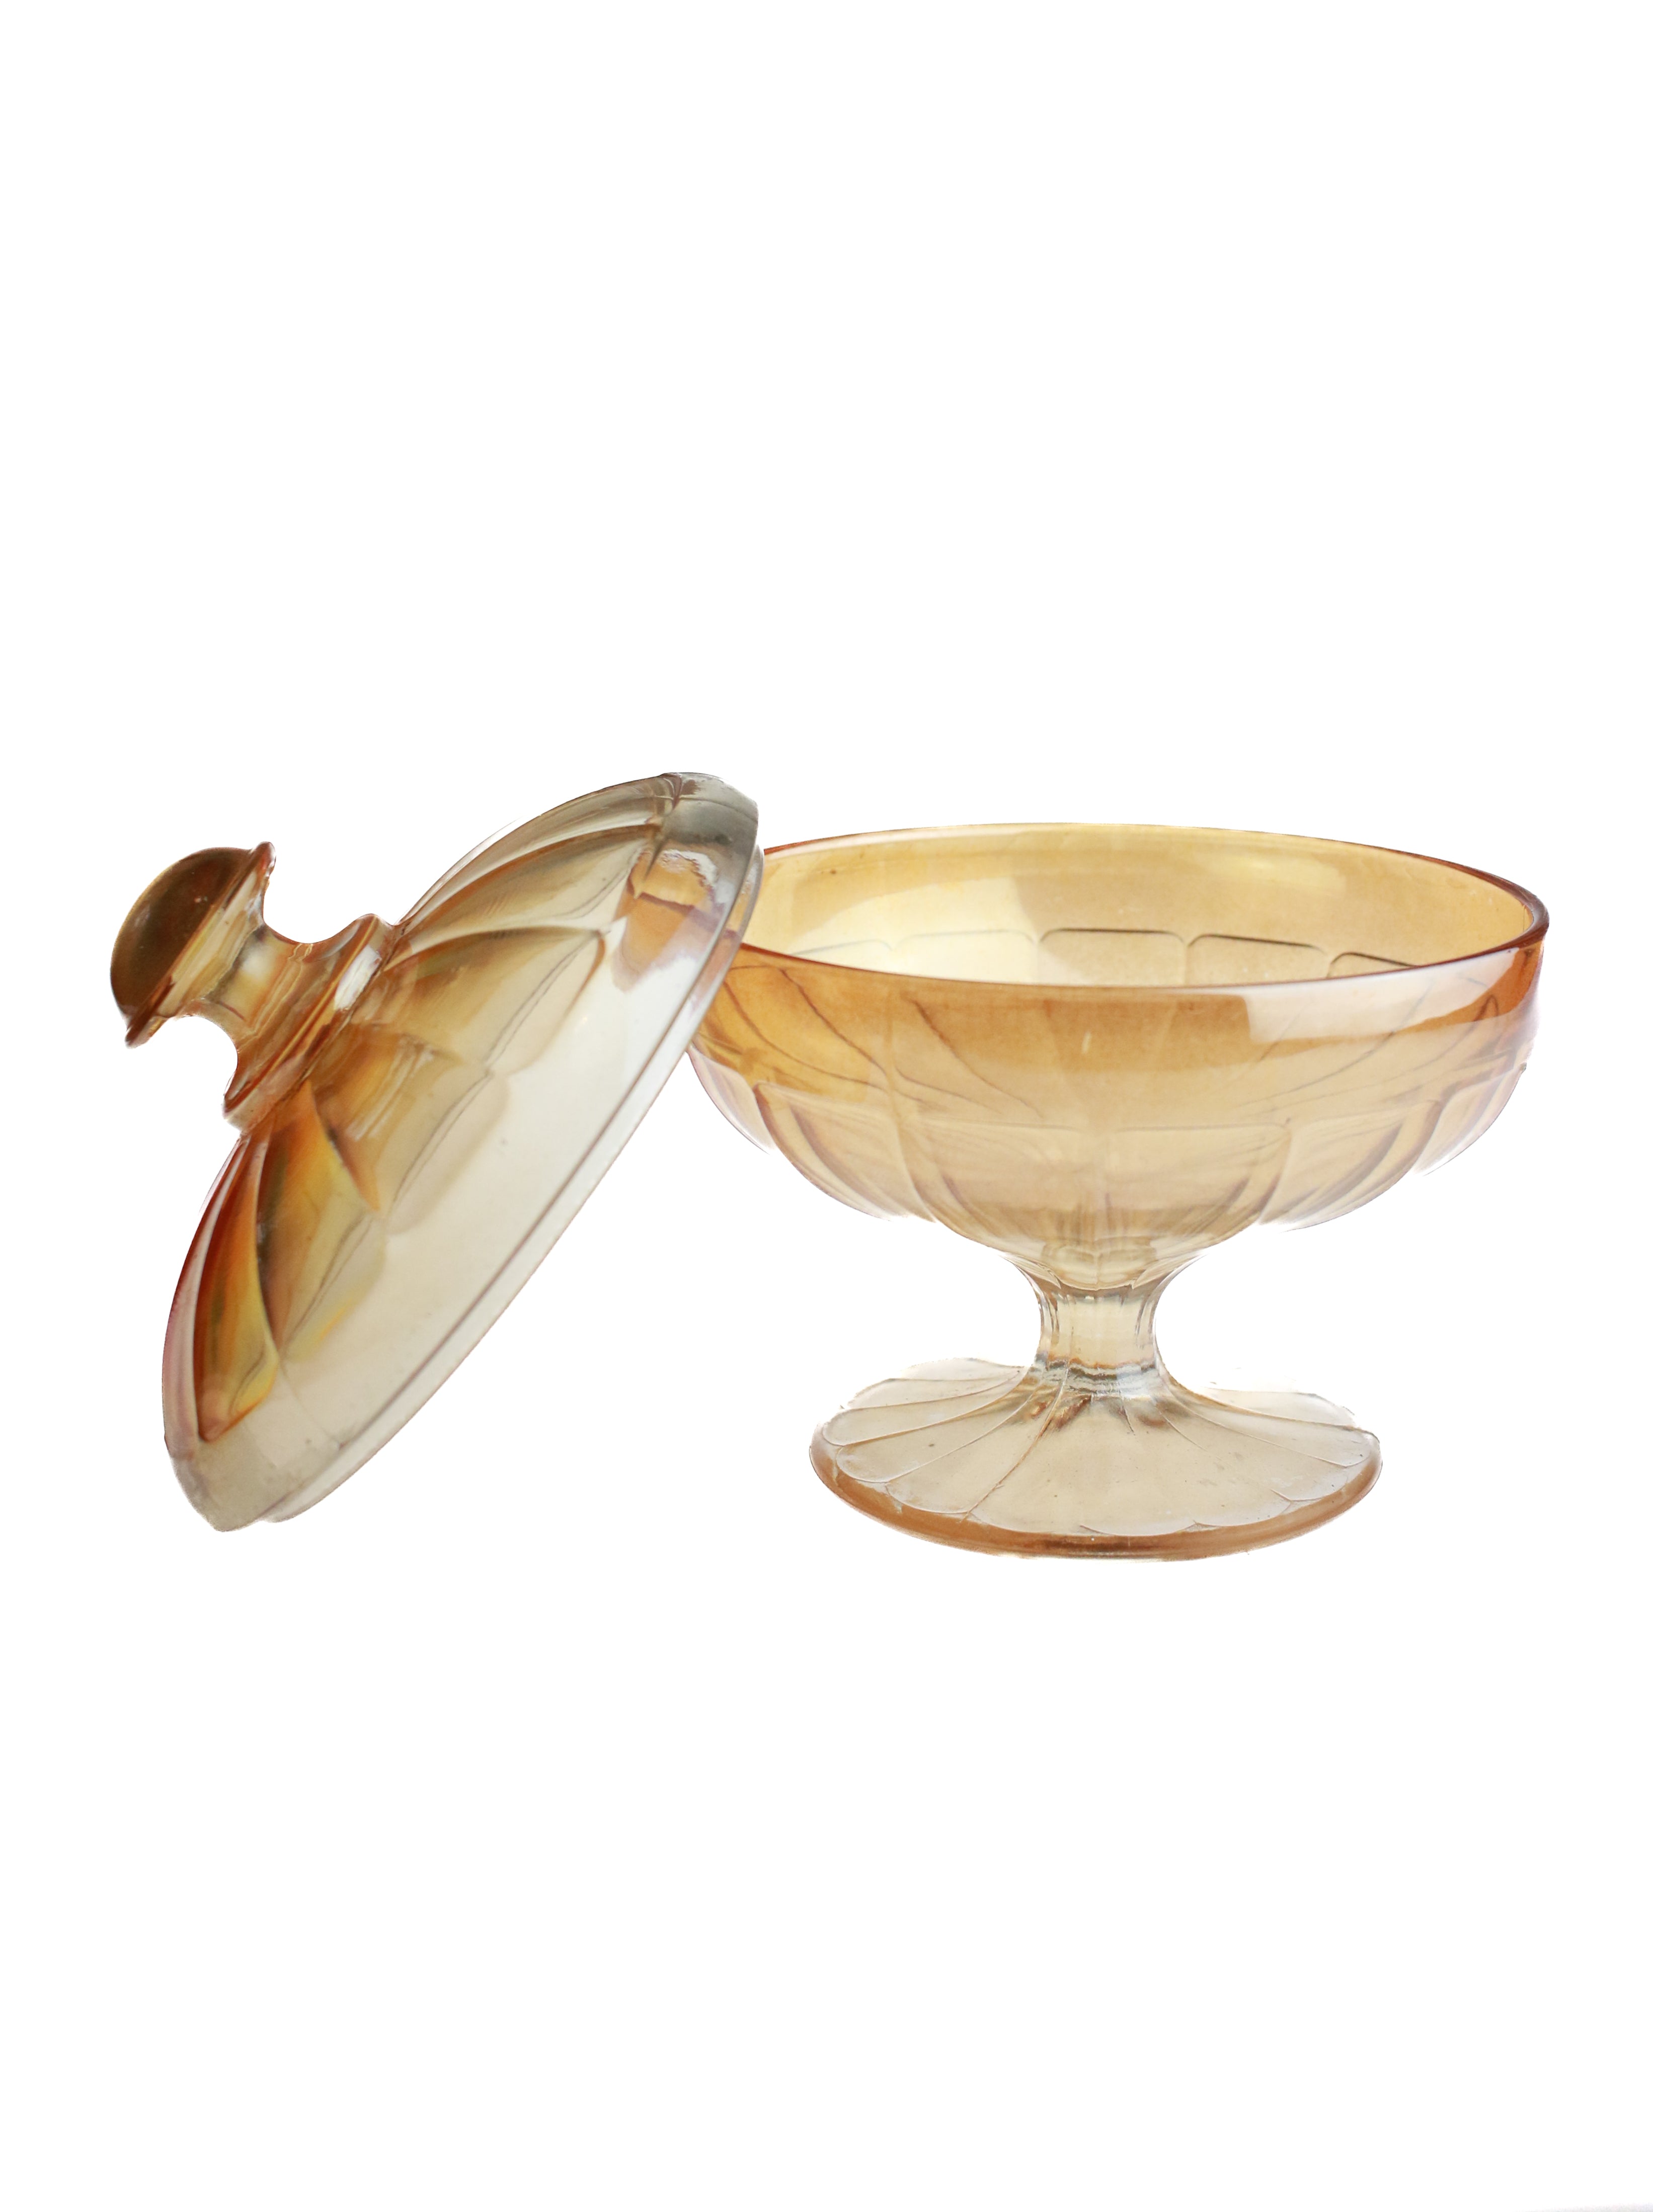 Iridescent Creamsicle Candy Dish